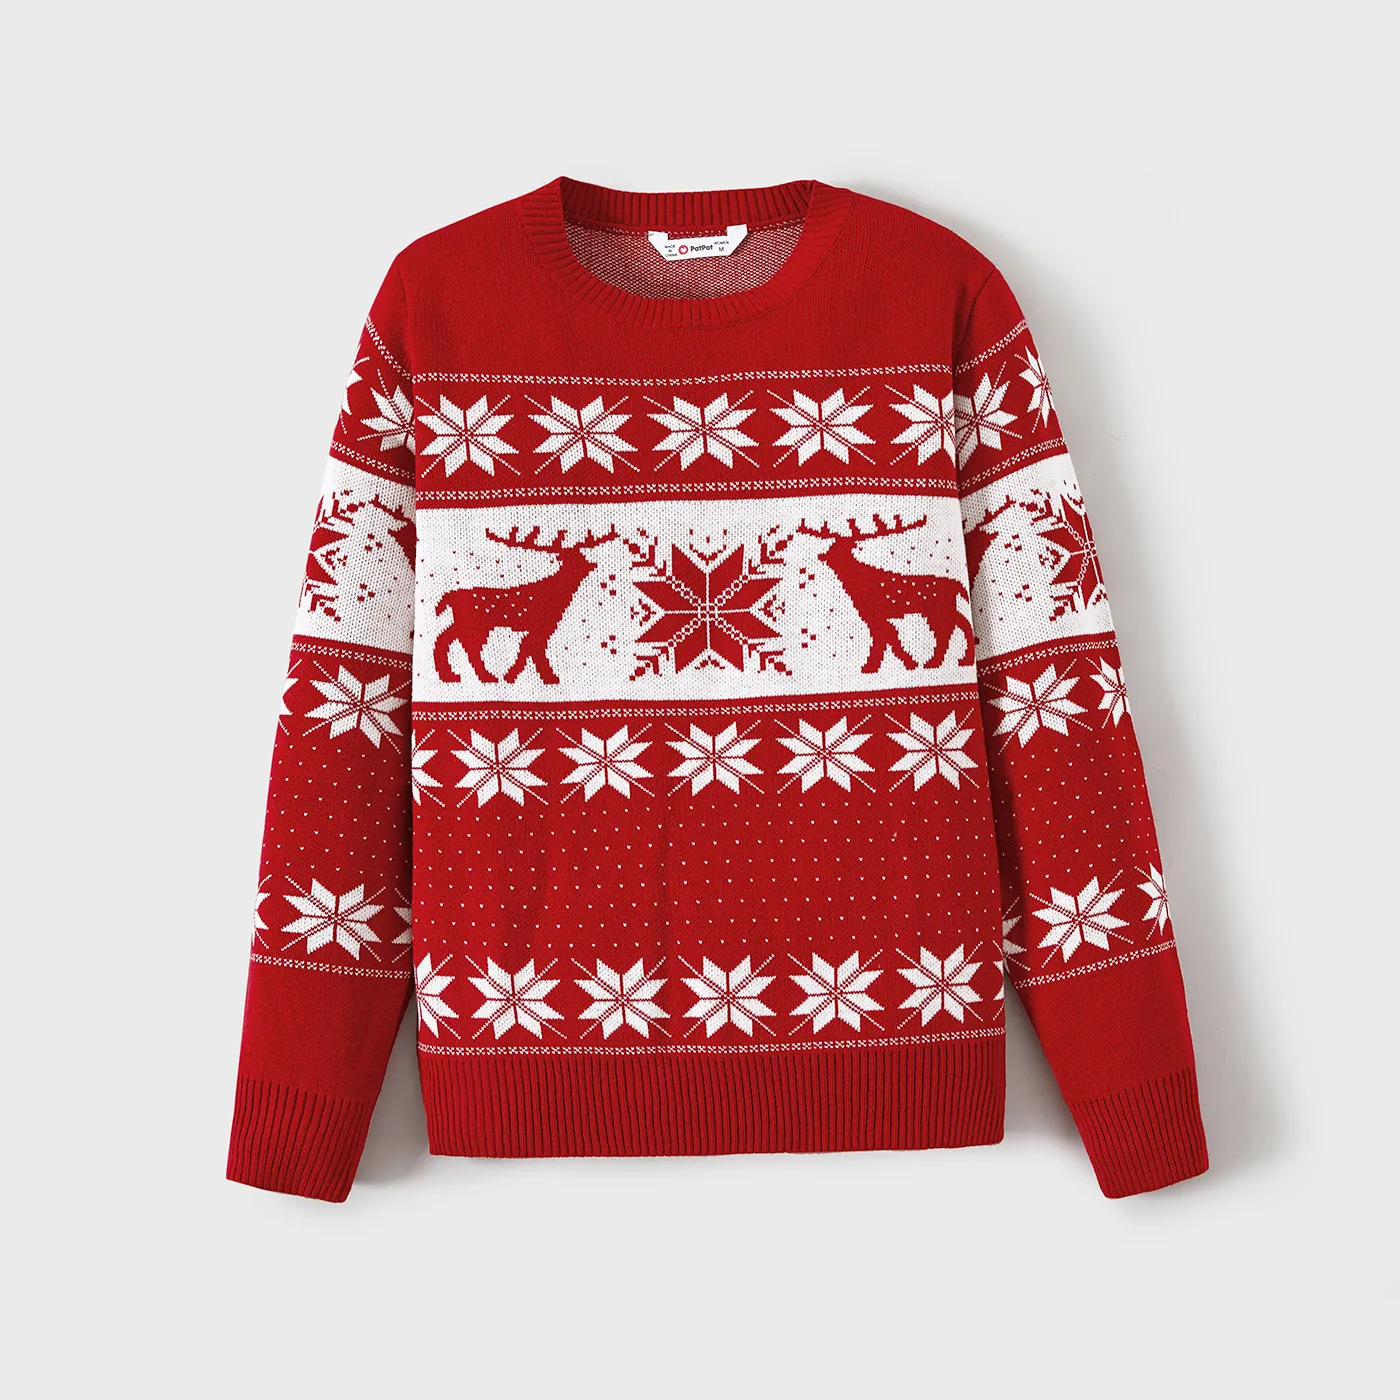 Noël Famille Matching Cerf Et Snowflake Graphique Manches Longues Tricot Pull